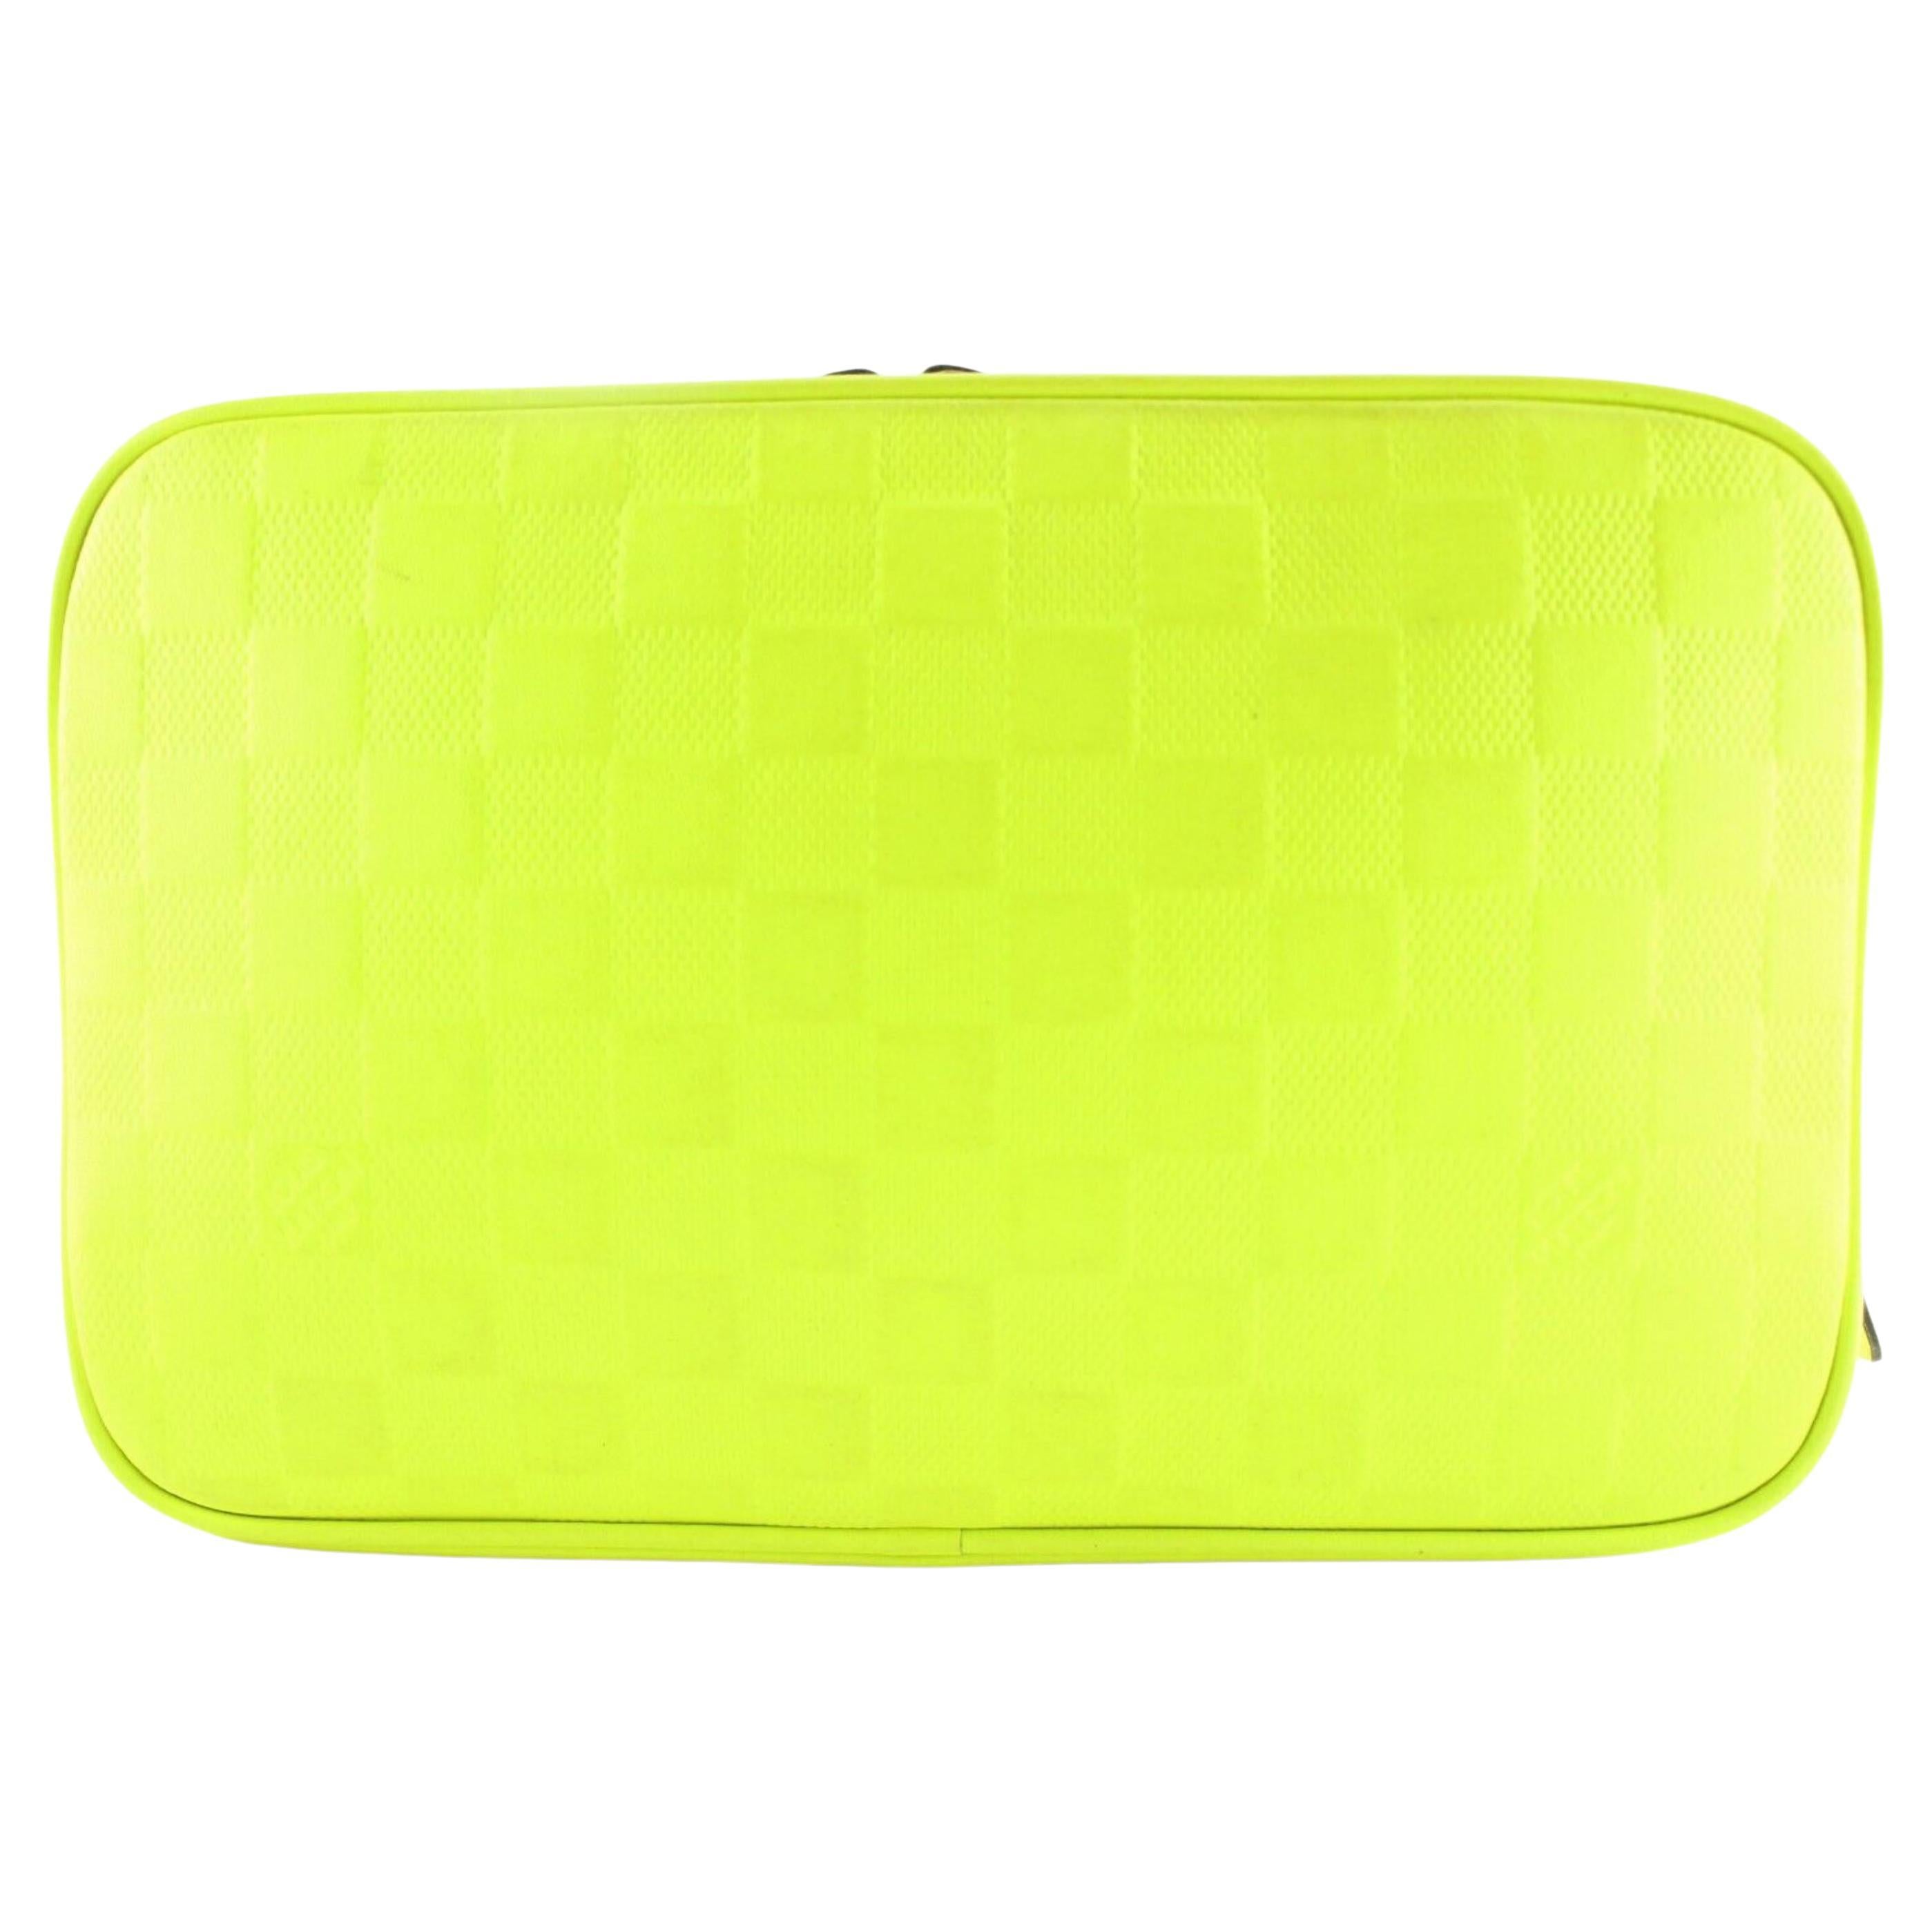 Louis Vuitton Neon Green Damier Infini Leather Trousse Cosmetic Pouch 5LK0223